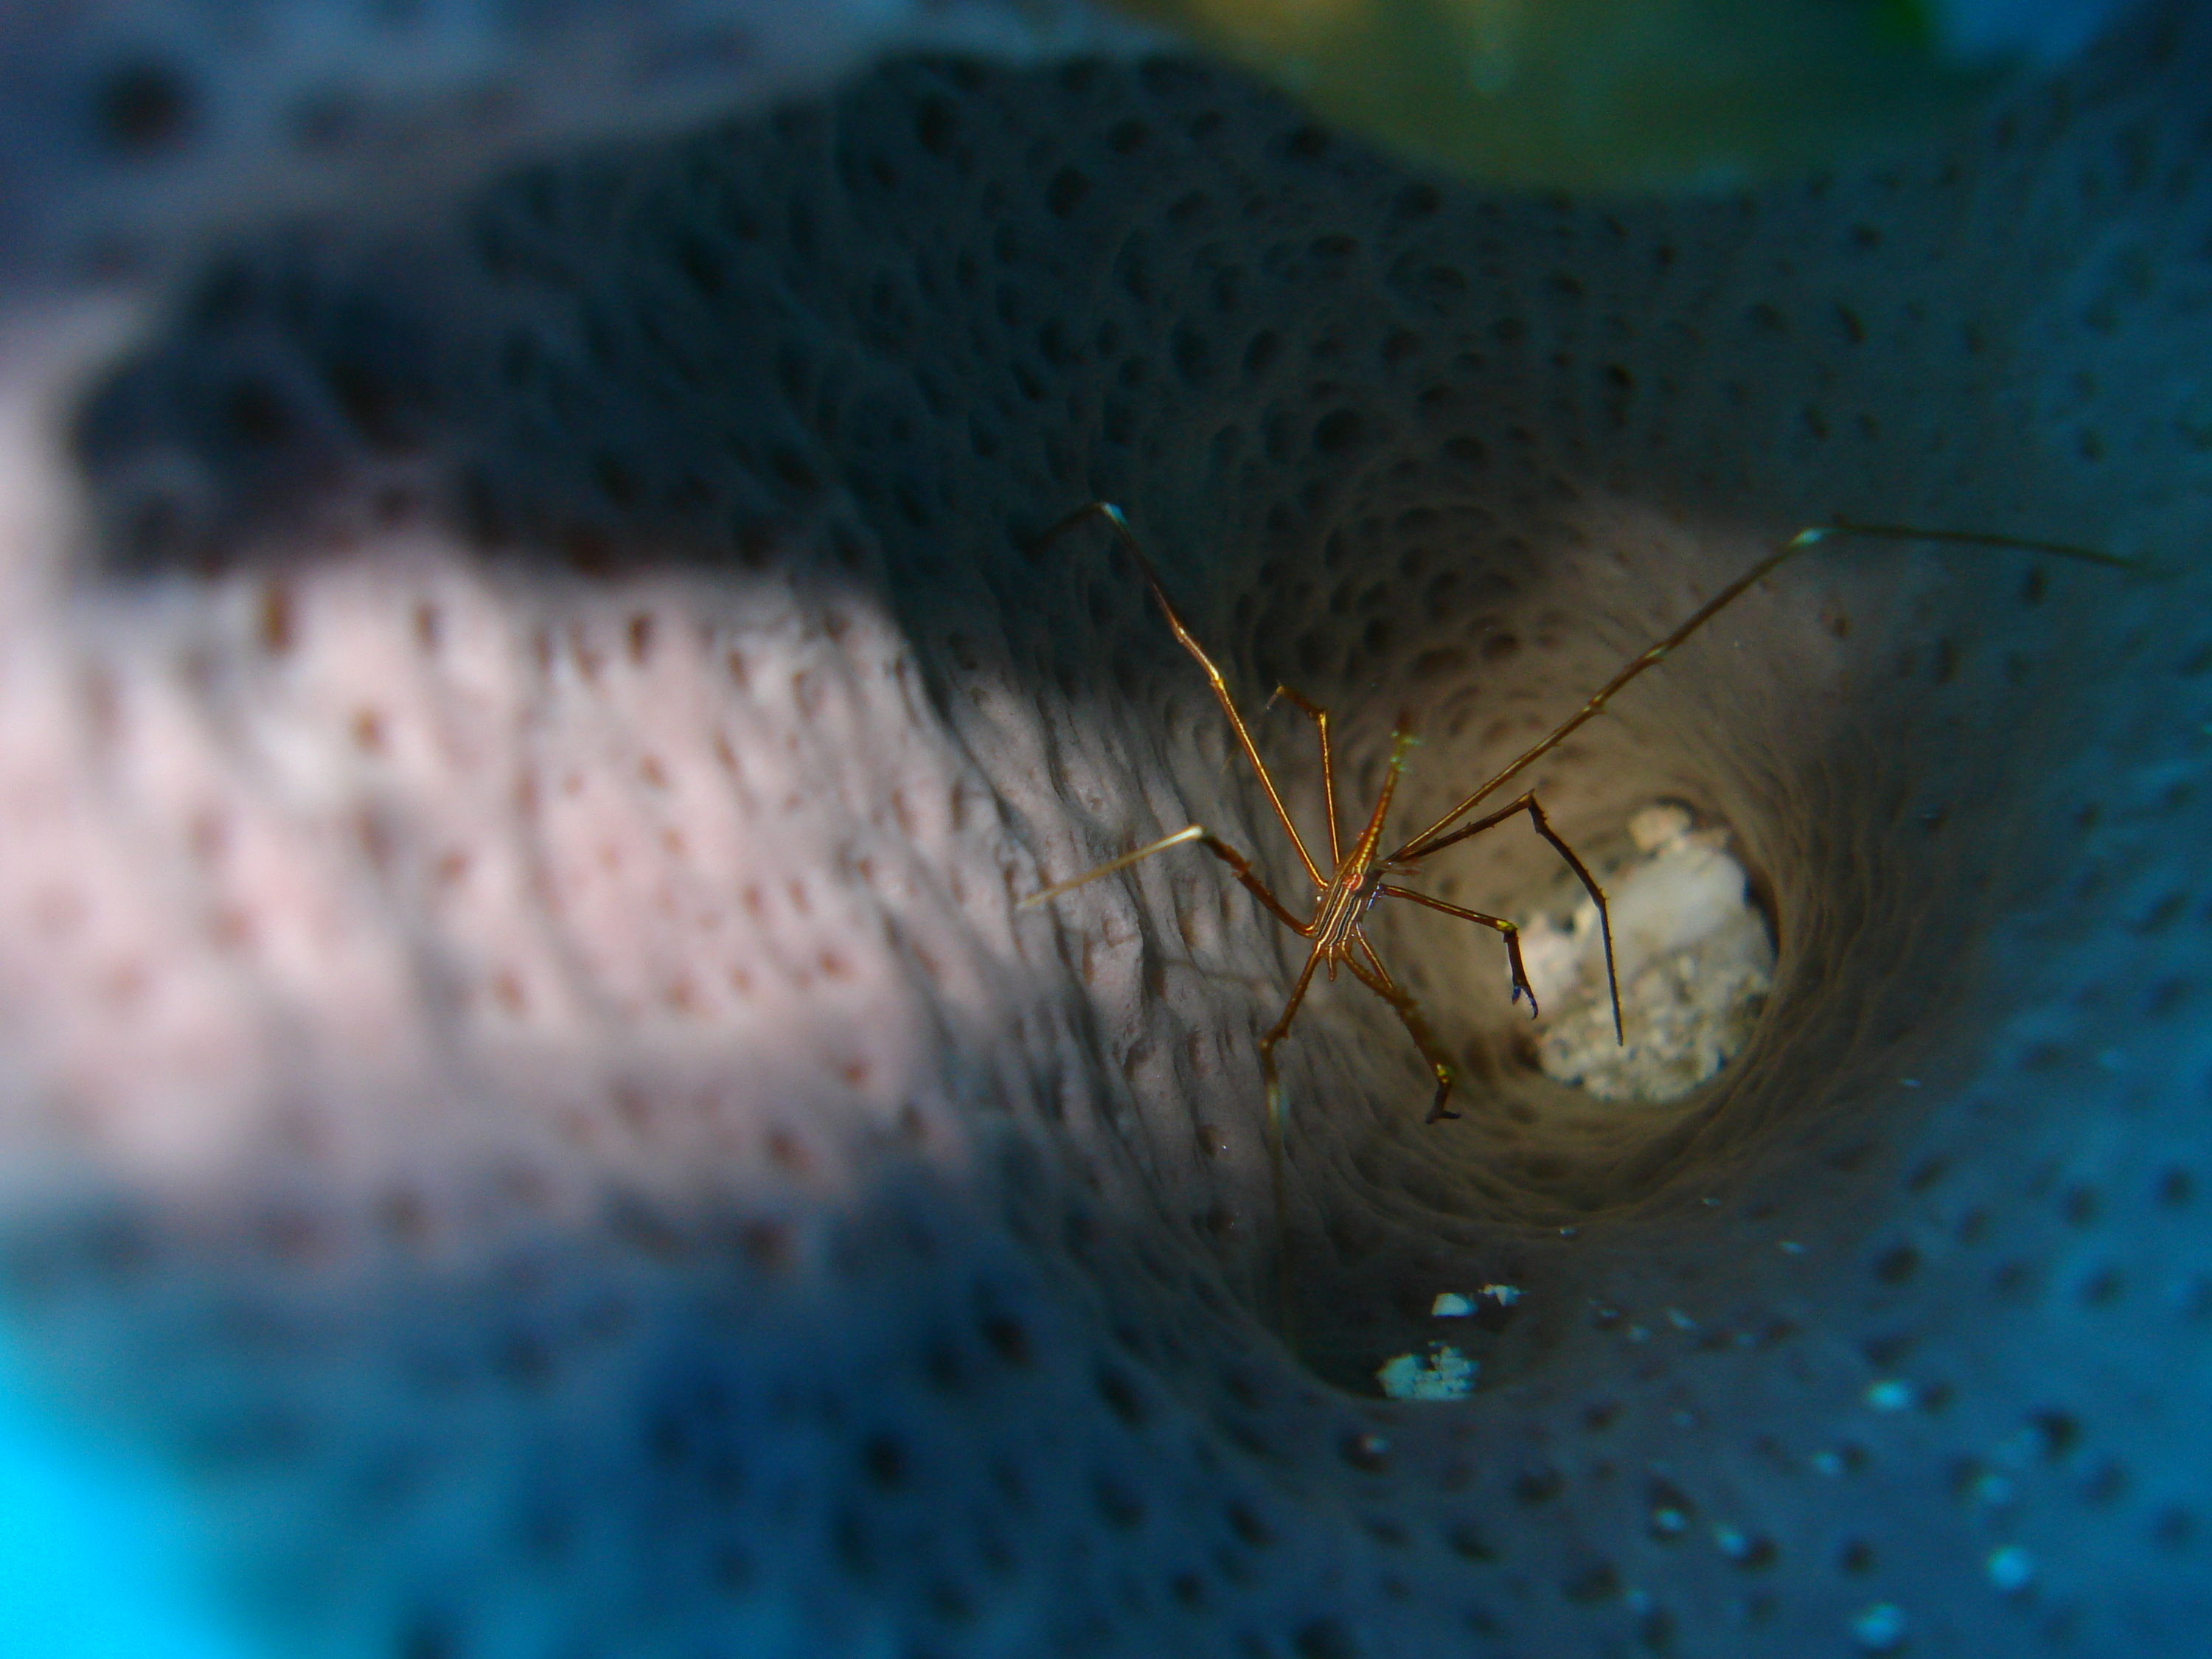 Arrow crab chilling in a tube sponge